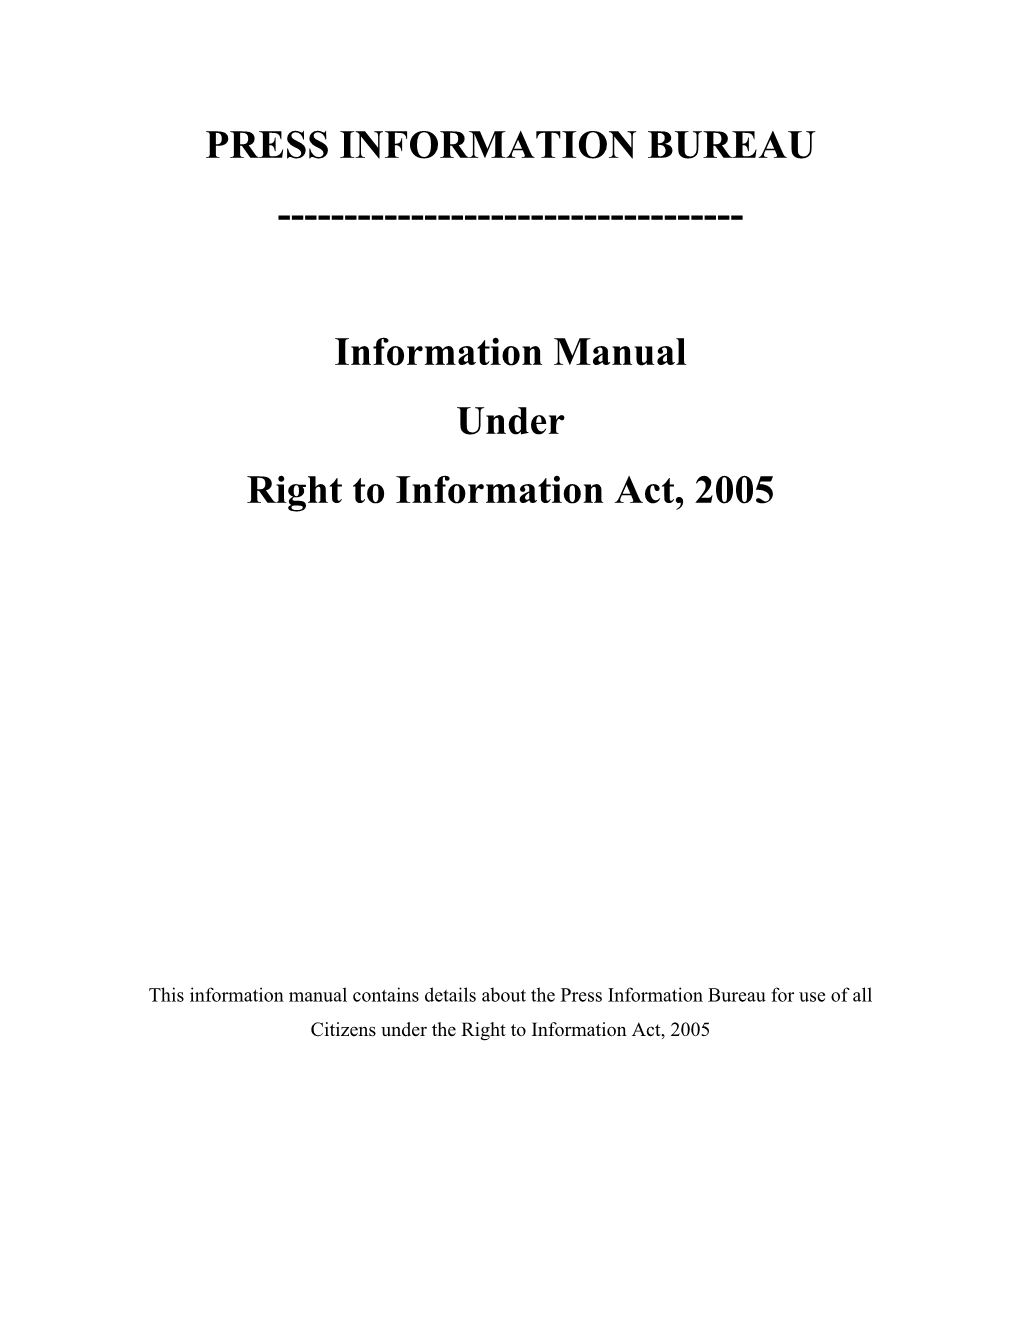 Information Manual Under Right to Information Act, 2005